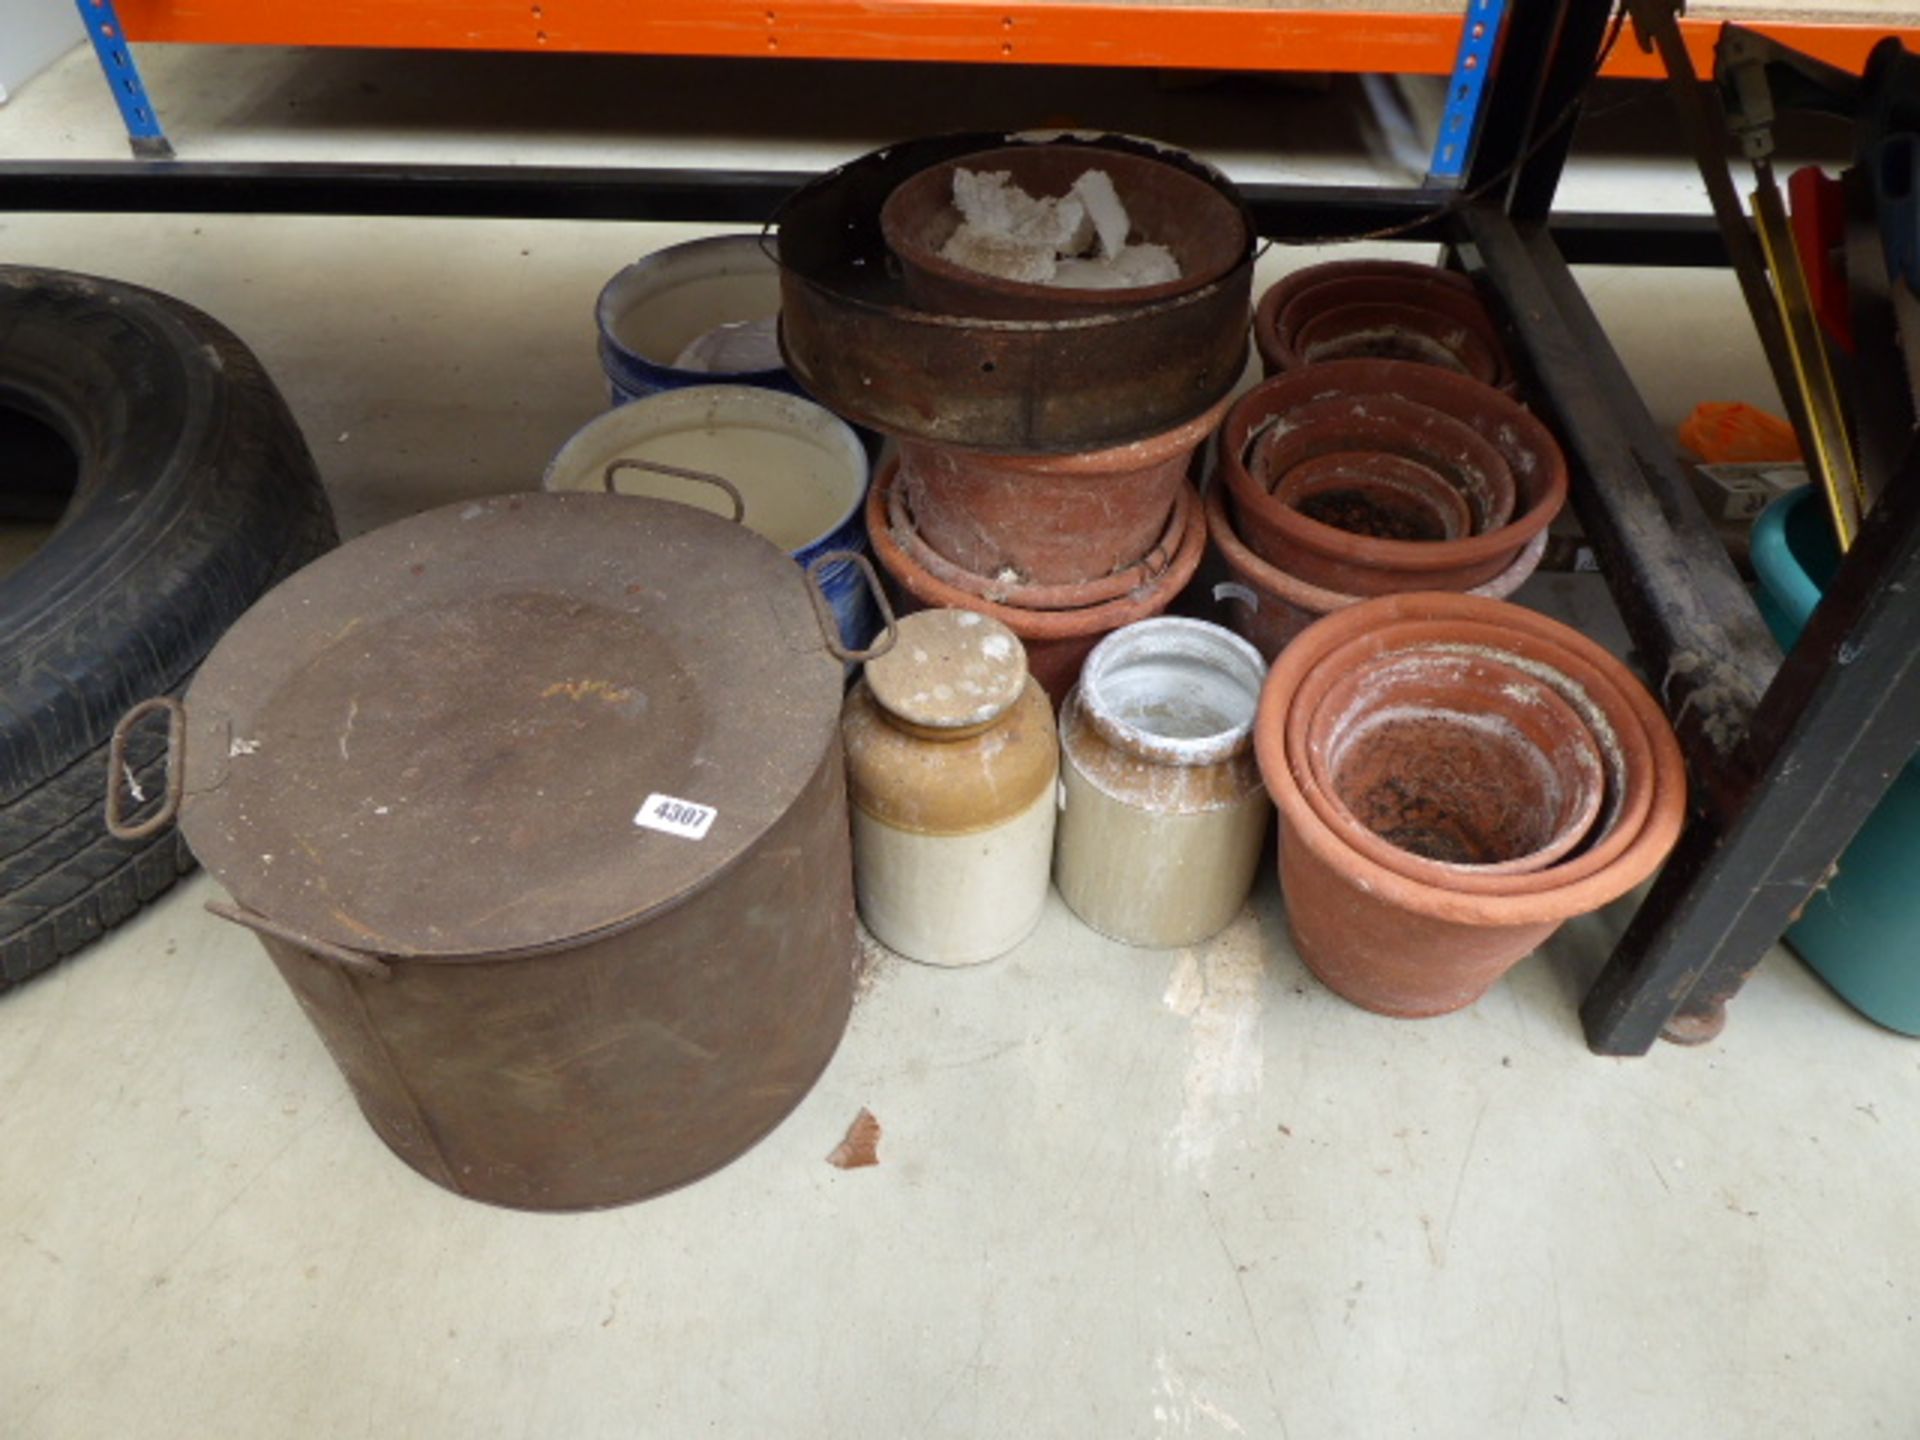 Quantity of terracotta pots and other pots